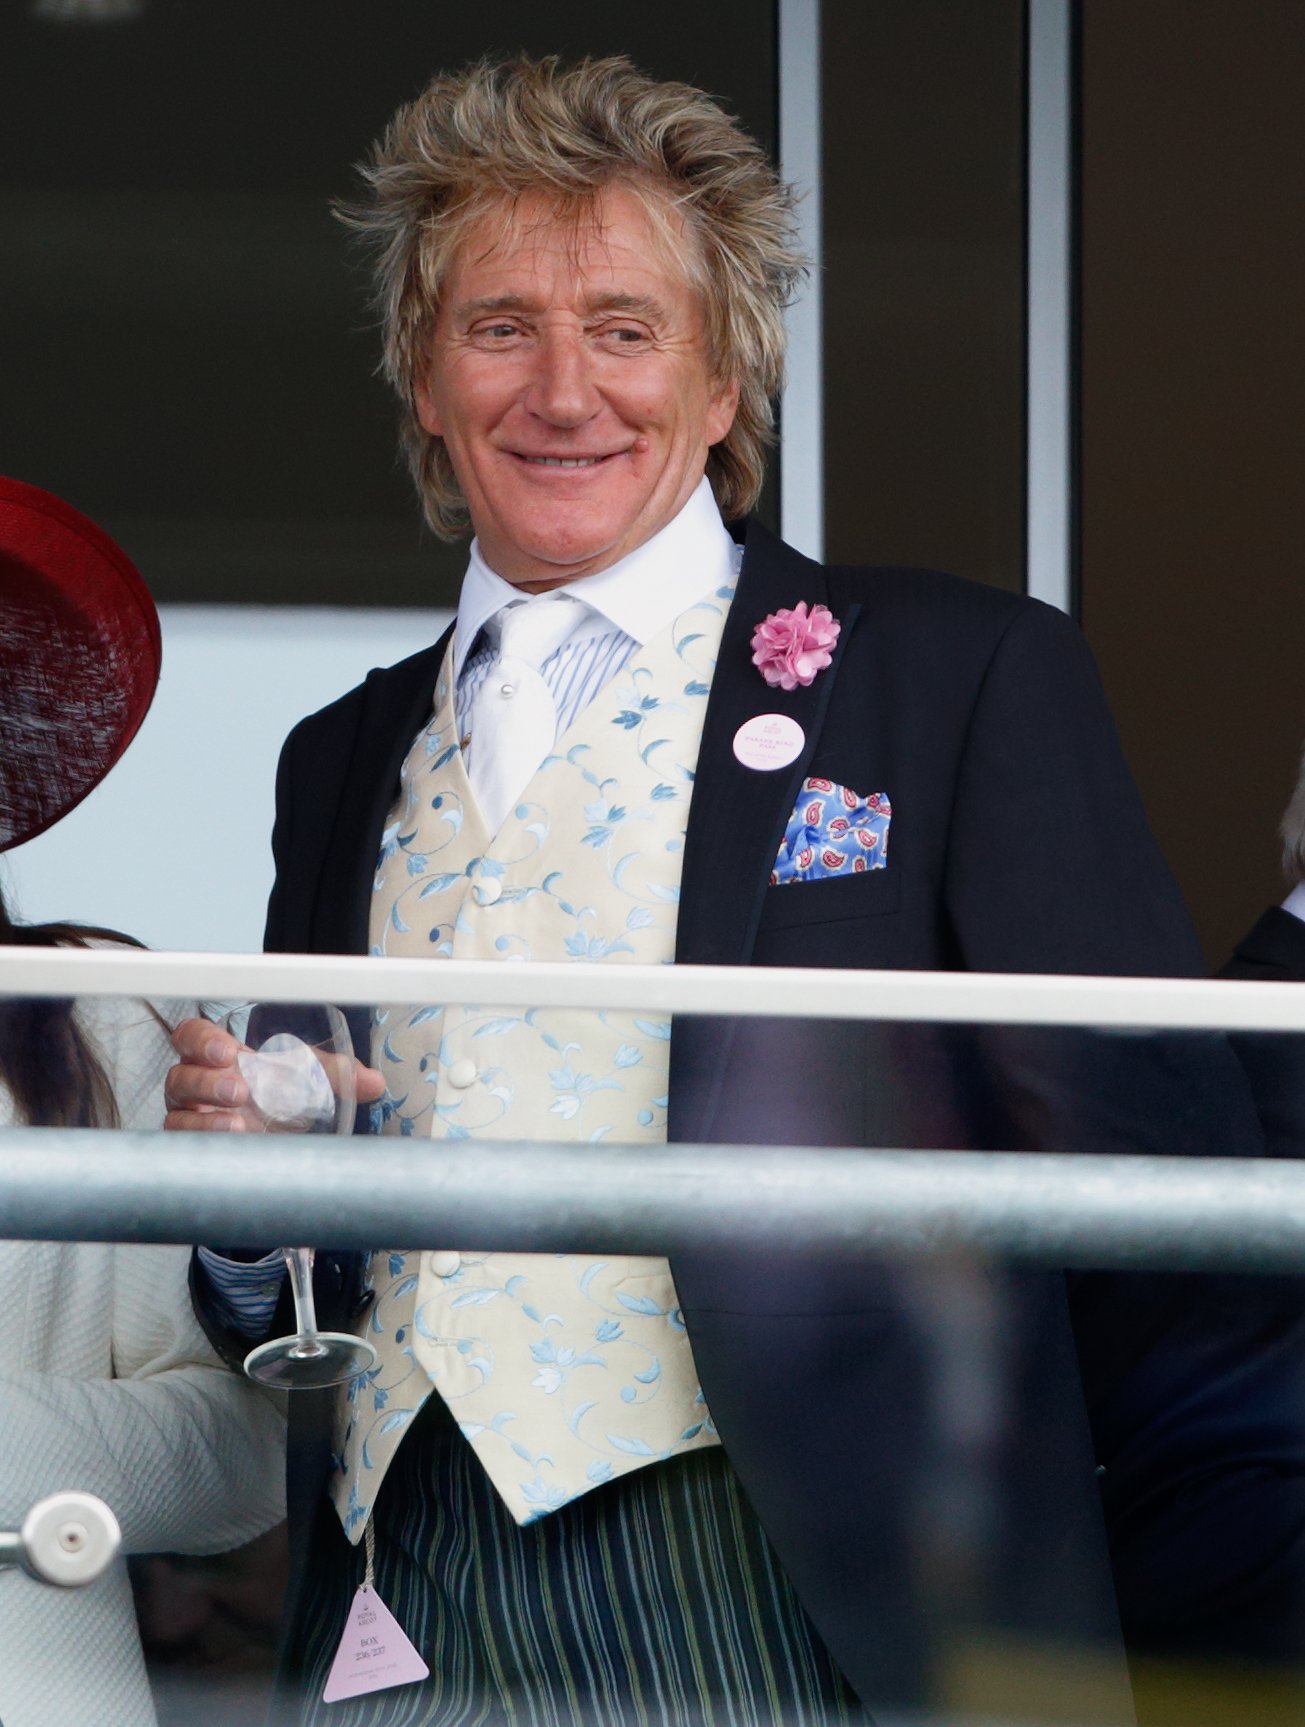 Sir Rod Stewart attends day 2 of the Royal Ascot at Ascot Racecourse on June 15, 2016 in England | Photo: Getty Images